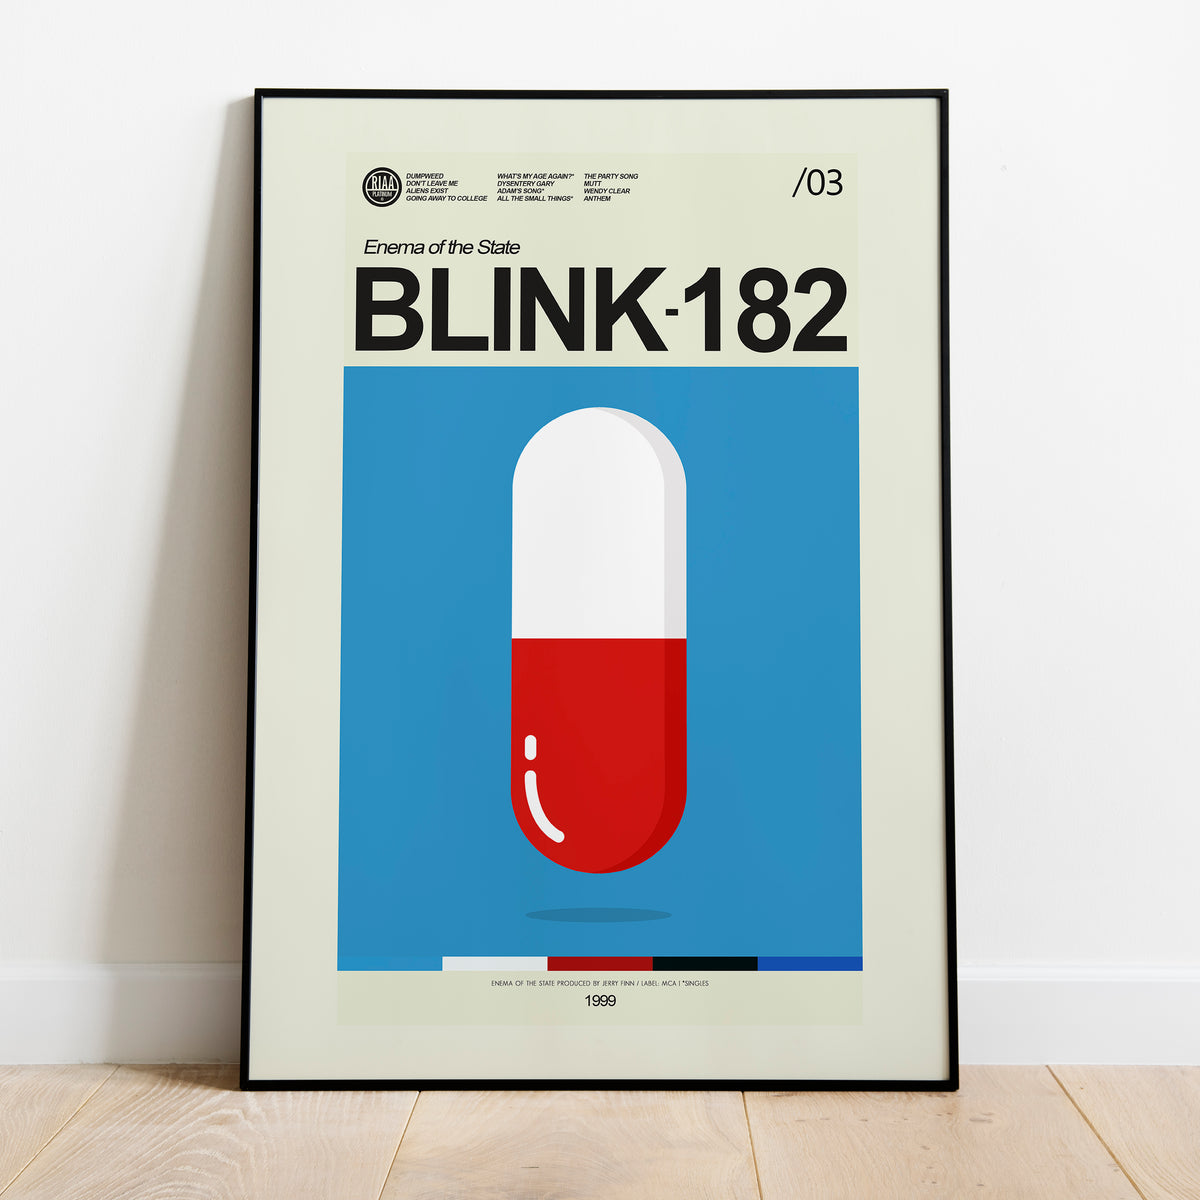 Blink-182 - Enema of the State (Album) Inspired | 12"x18" or 18"x24" Print only